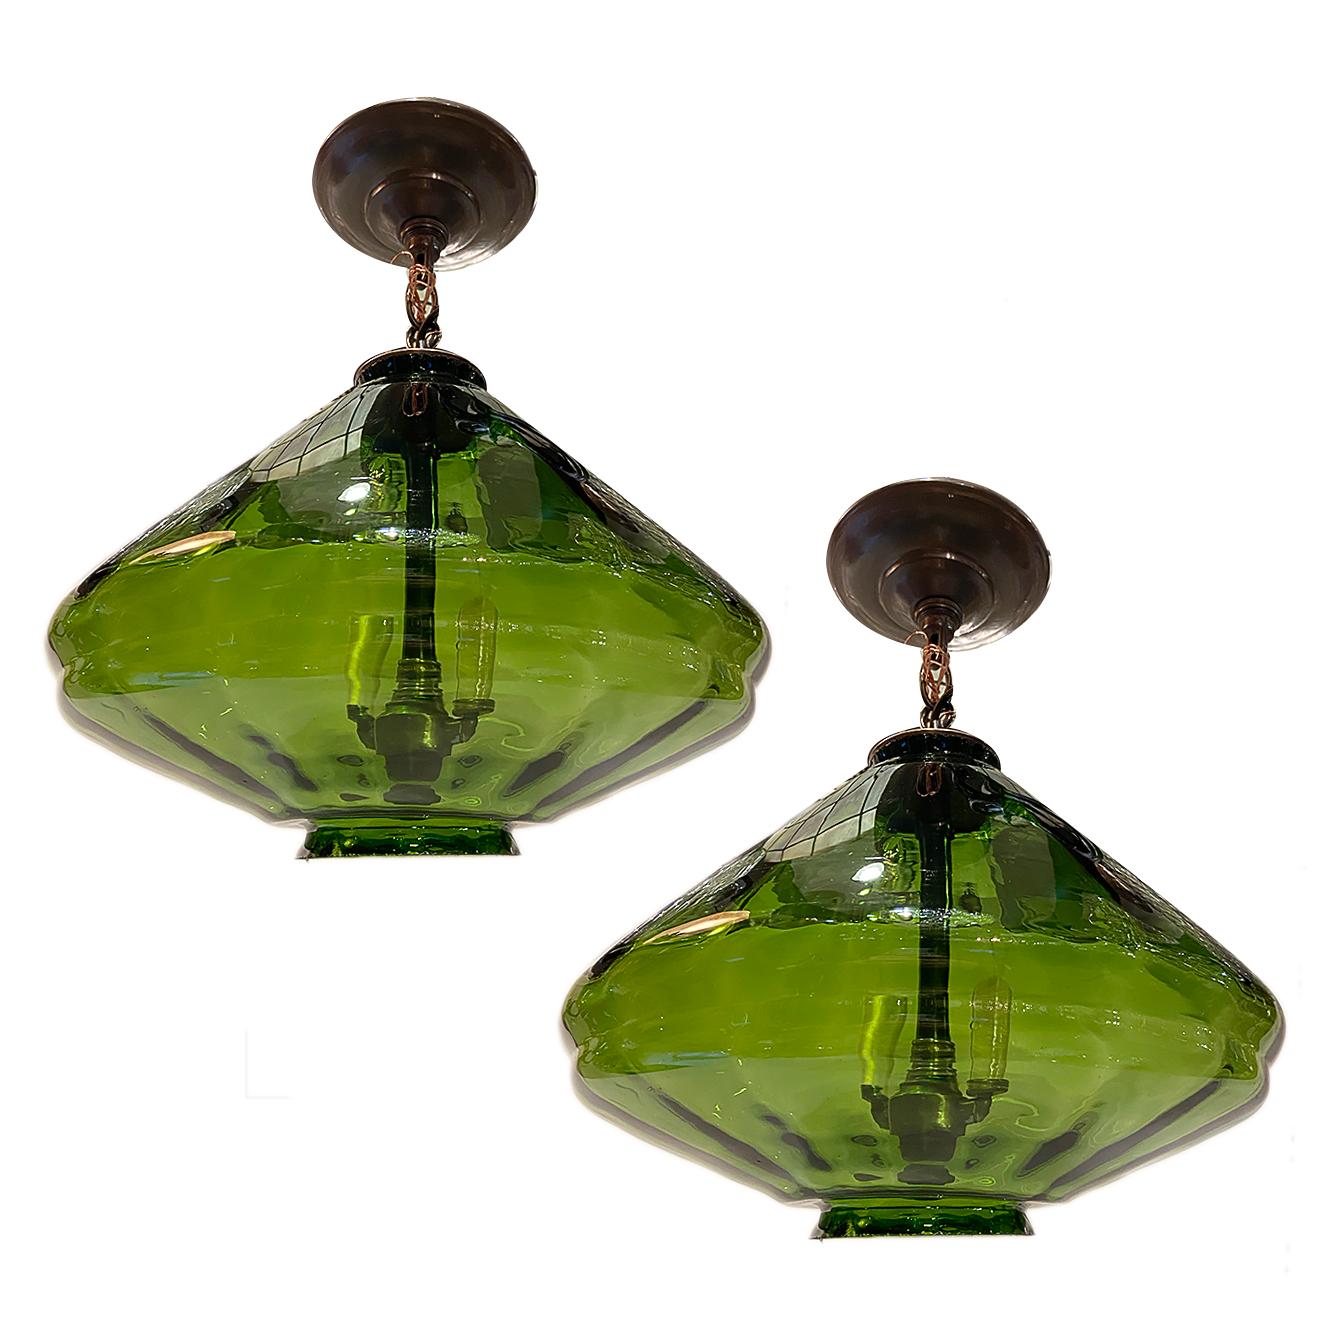 A pair of Italian circa 1950's blown Murano glass lanterns with two interior lights each. Sold individually.

Measurements:
Min. drop 10.75